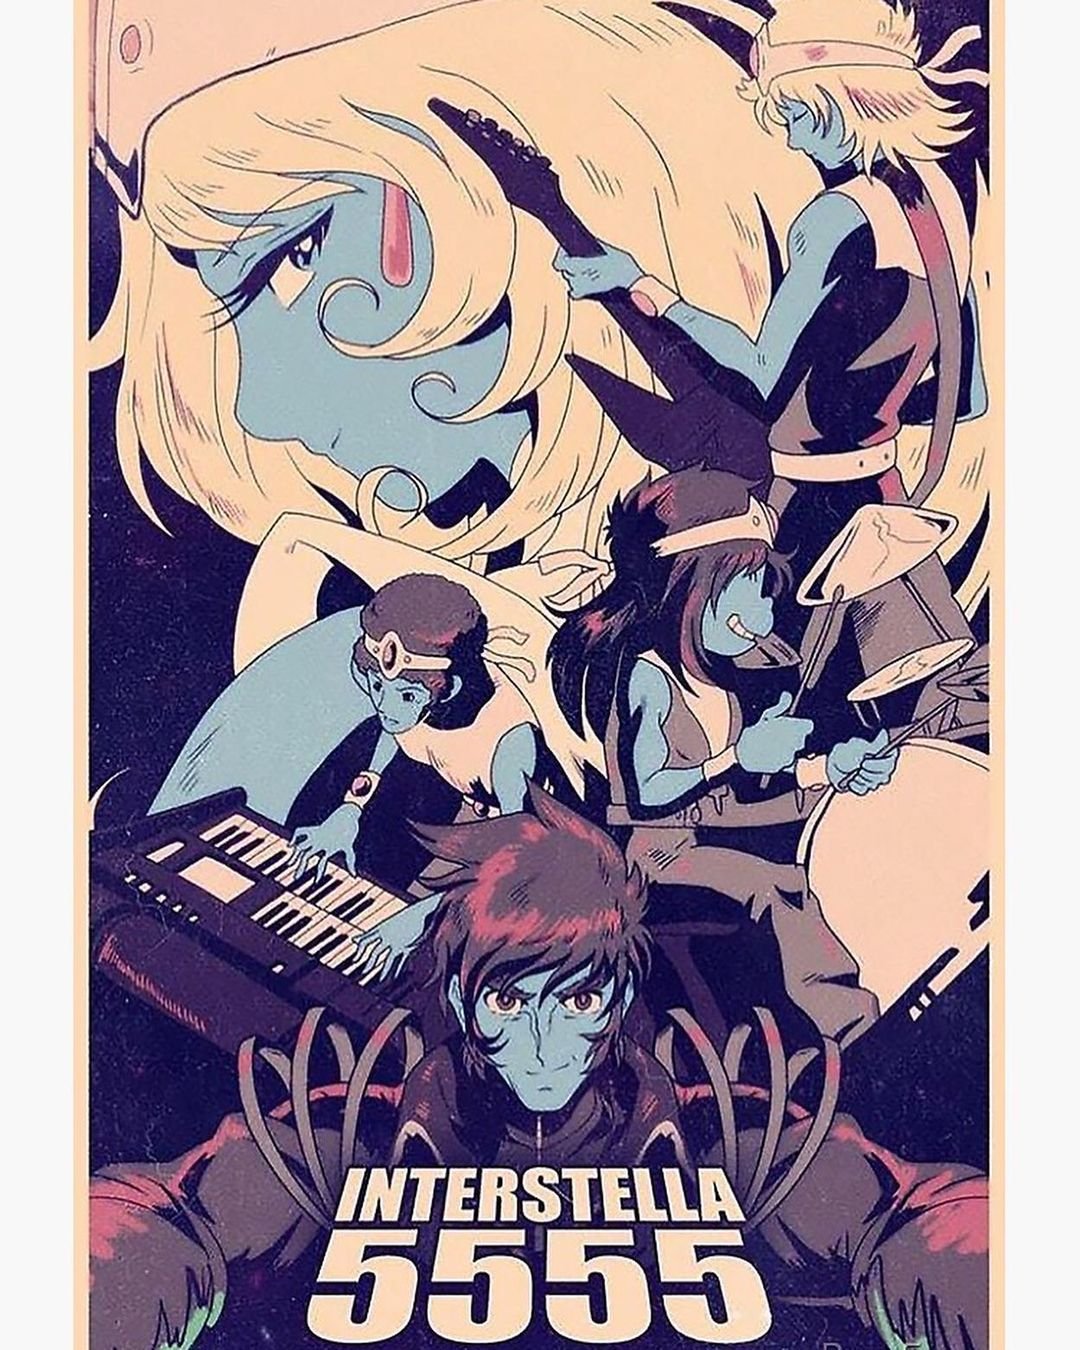 Interstella 5555: The 5Tory Of The 5Ecret 5Tar 5Ystem Wallpapers